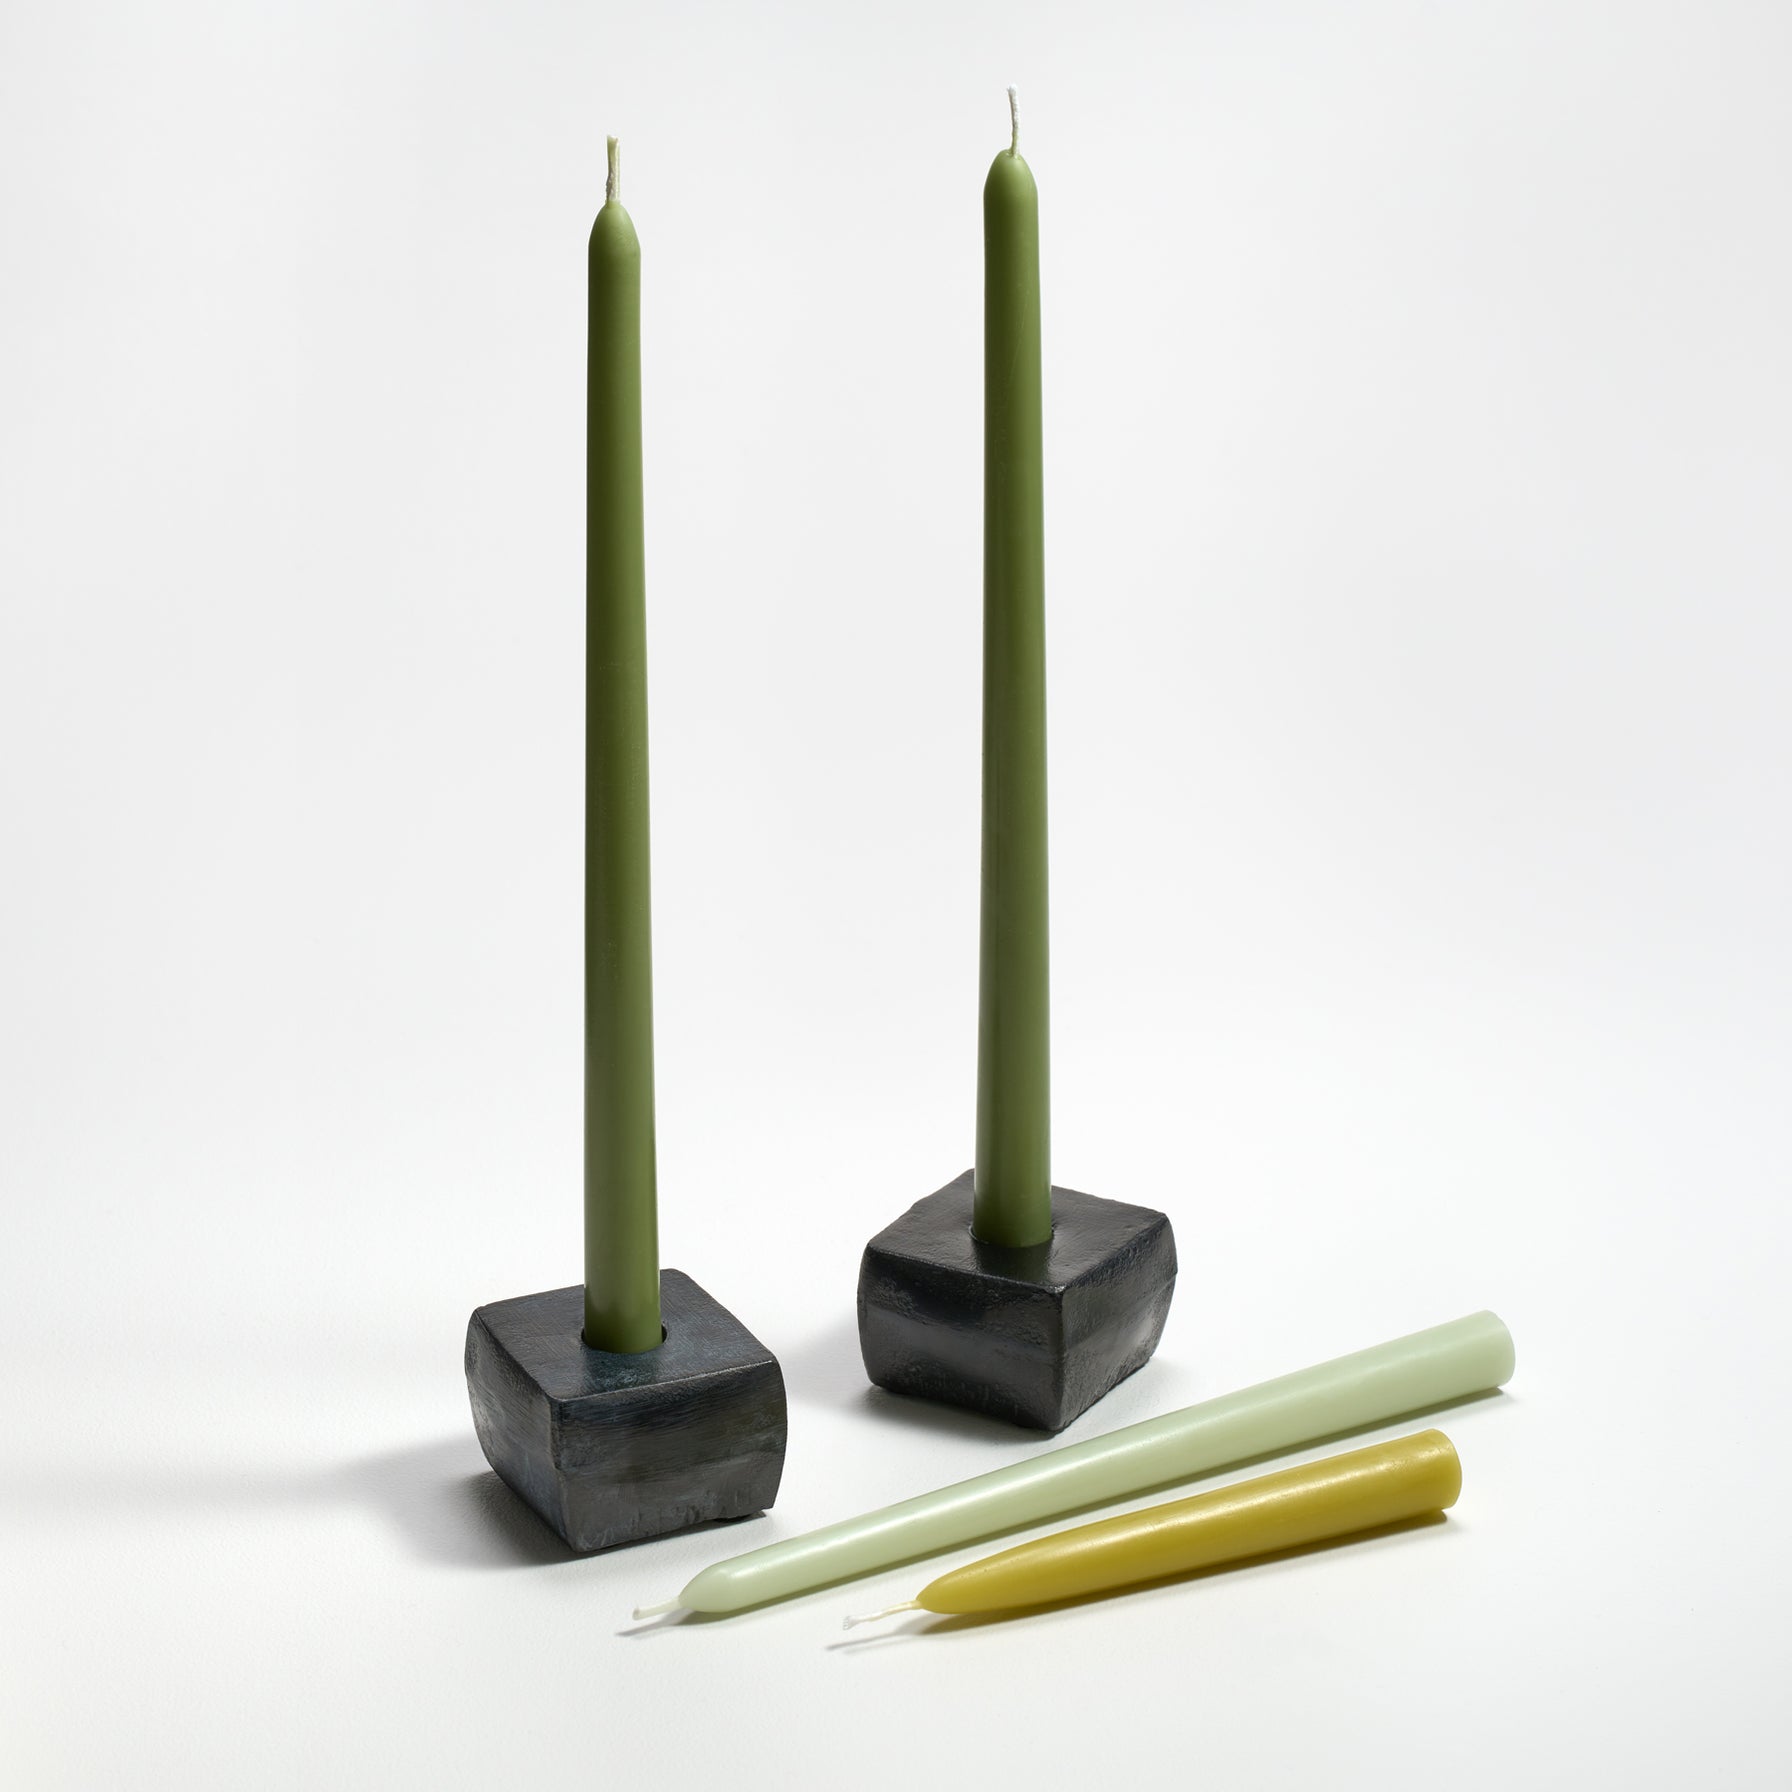 Everyday Tapers are "classic" candles. What makes a classic a classic? Beautiful anytime and anywhere – simple, meaningful, and perfect for every kind of occasion.  Set of 2, 100% pure North American beeswax candles. Each candle is hand poured and individually finished in New York State.